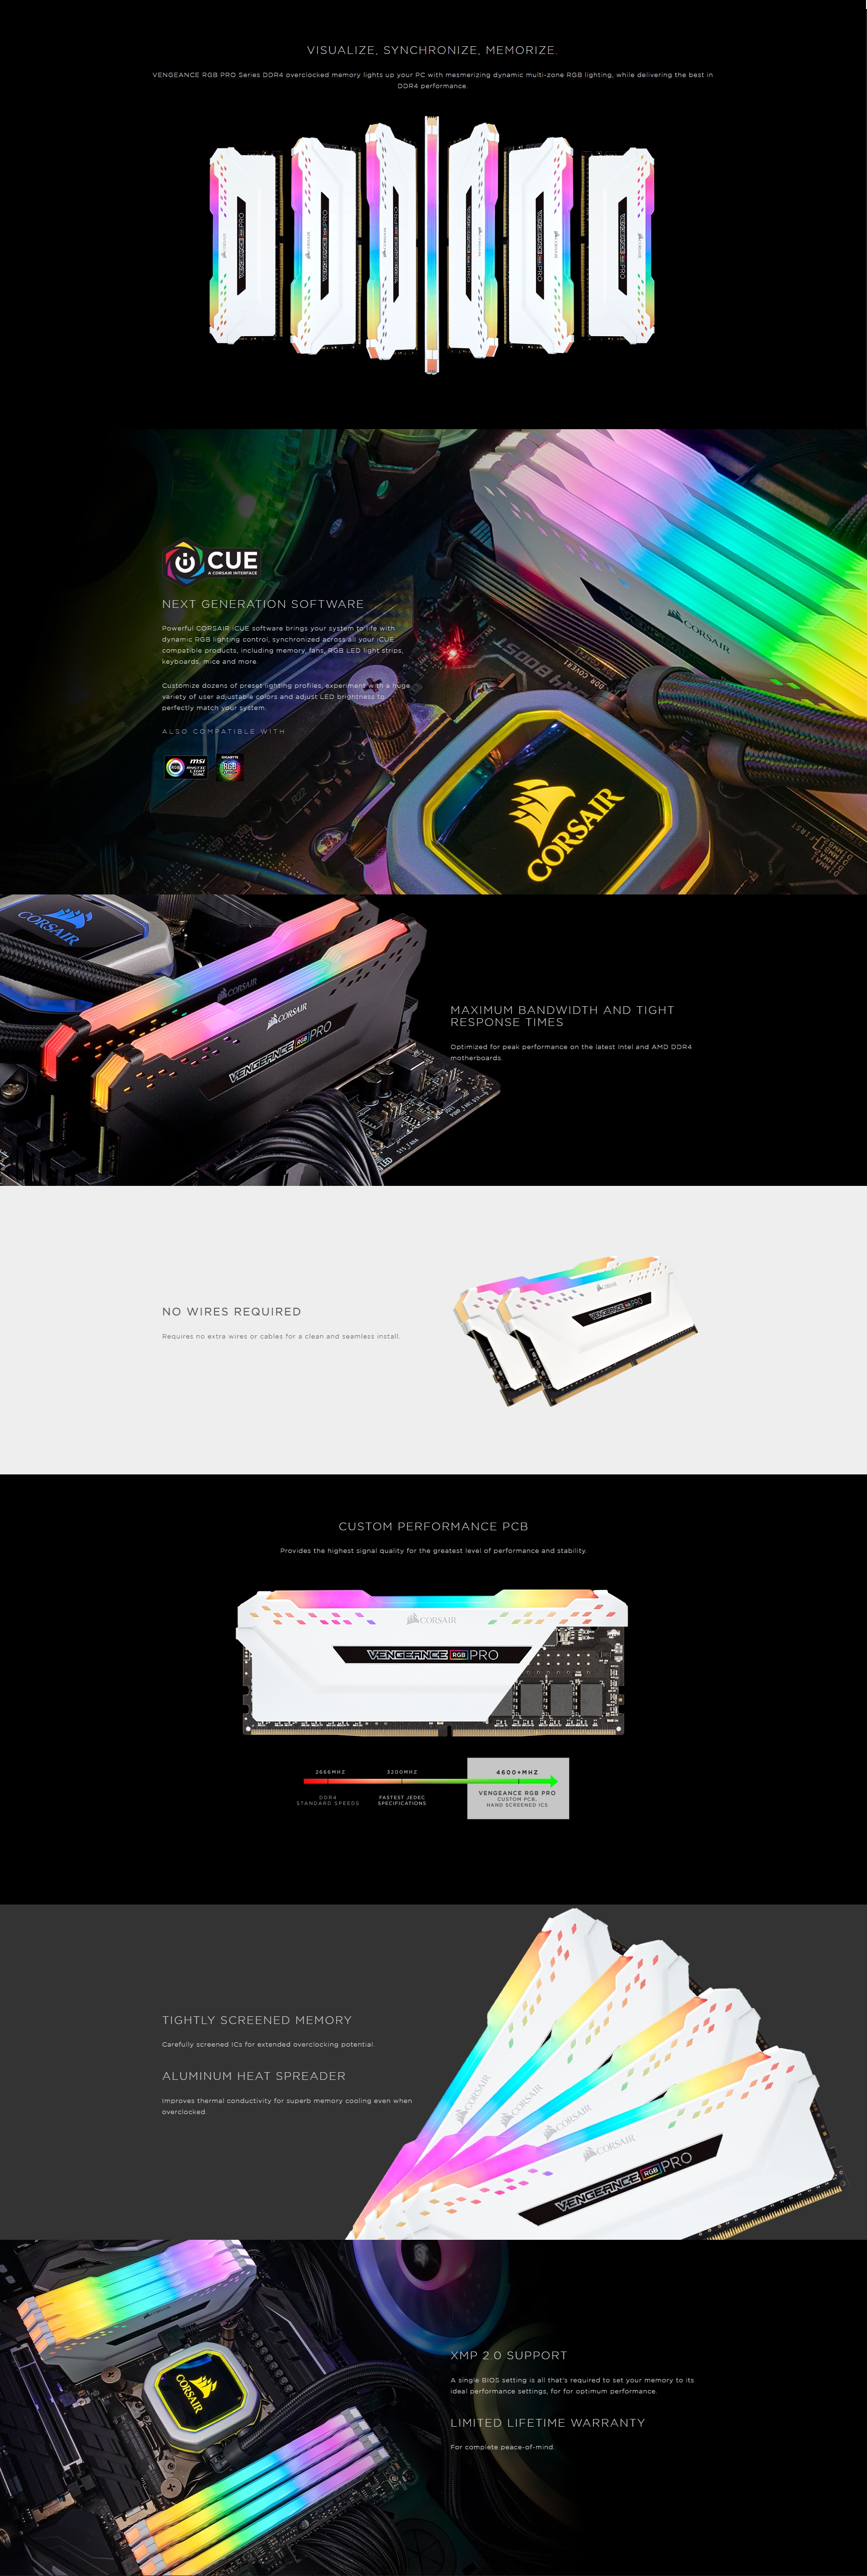 A large marketing image providing additional information about the product Corsair 16GB Kit (2x8GB) DDR4 Vengeance RGB Pro C18 3600MHz - White - Additional alt info not provided